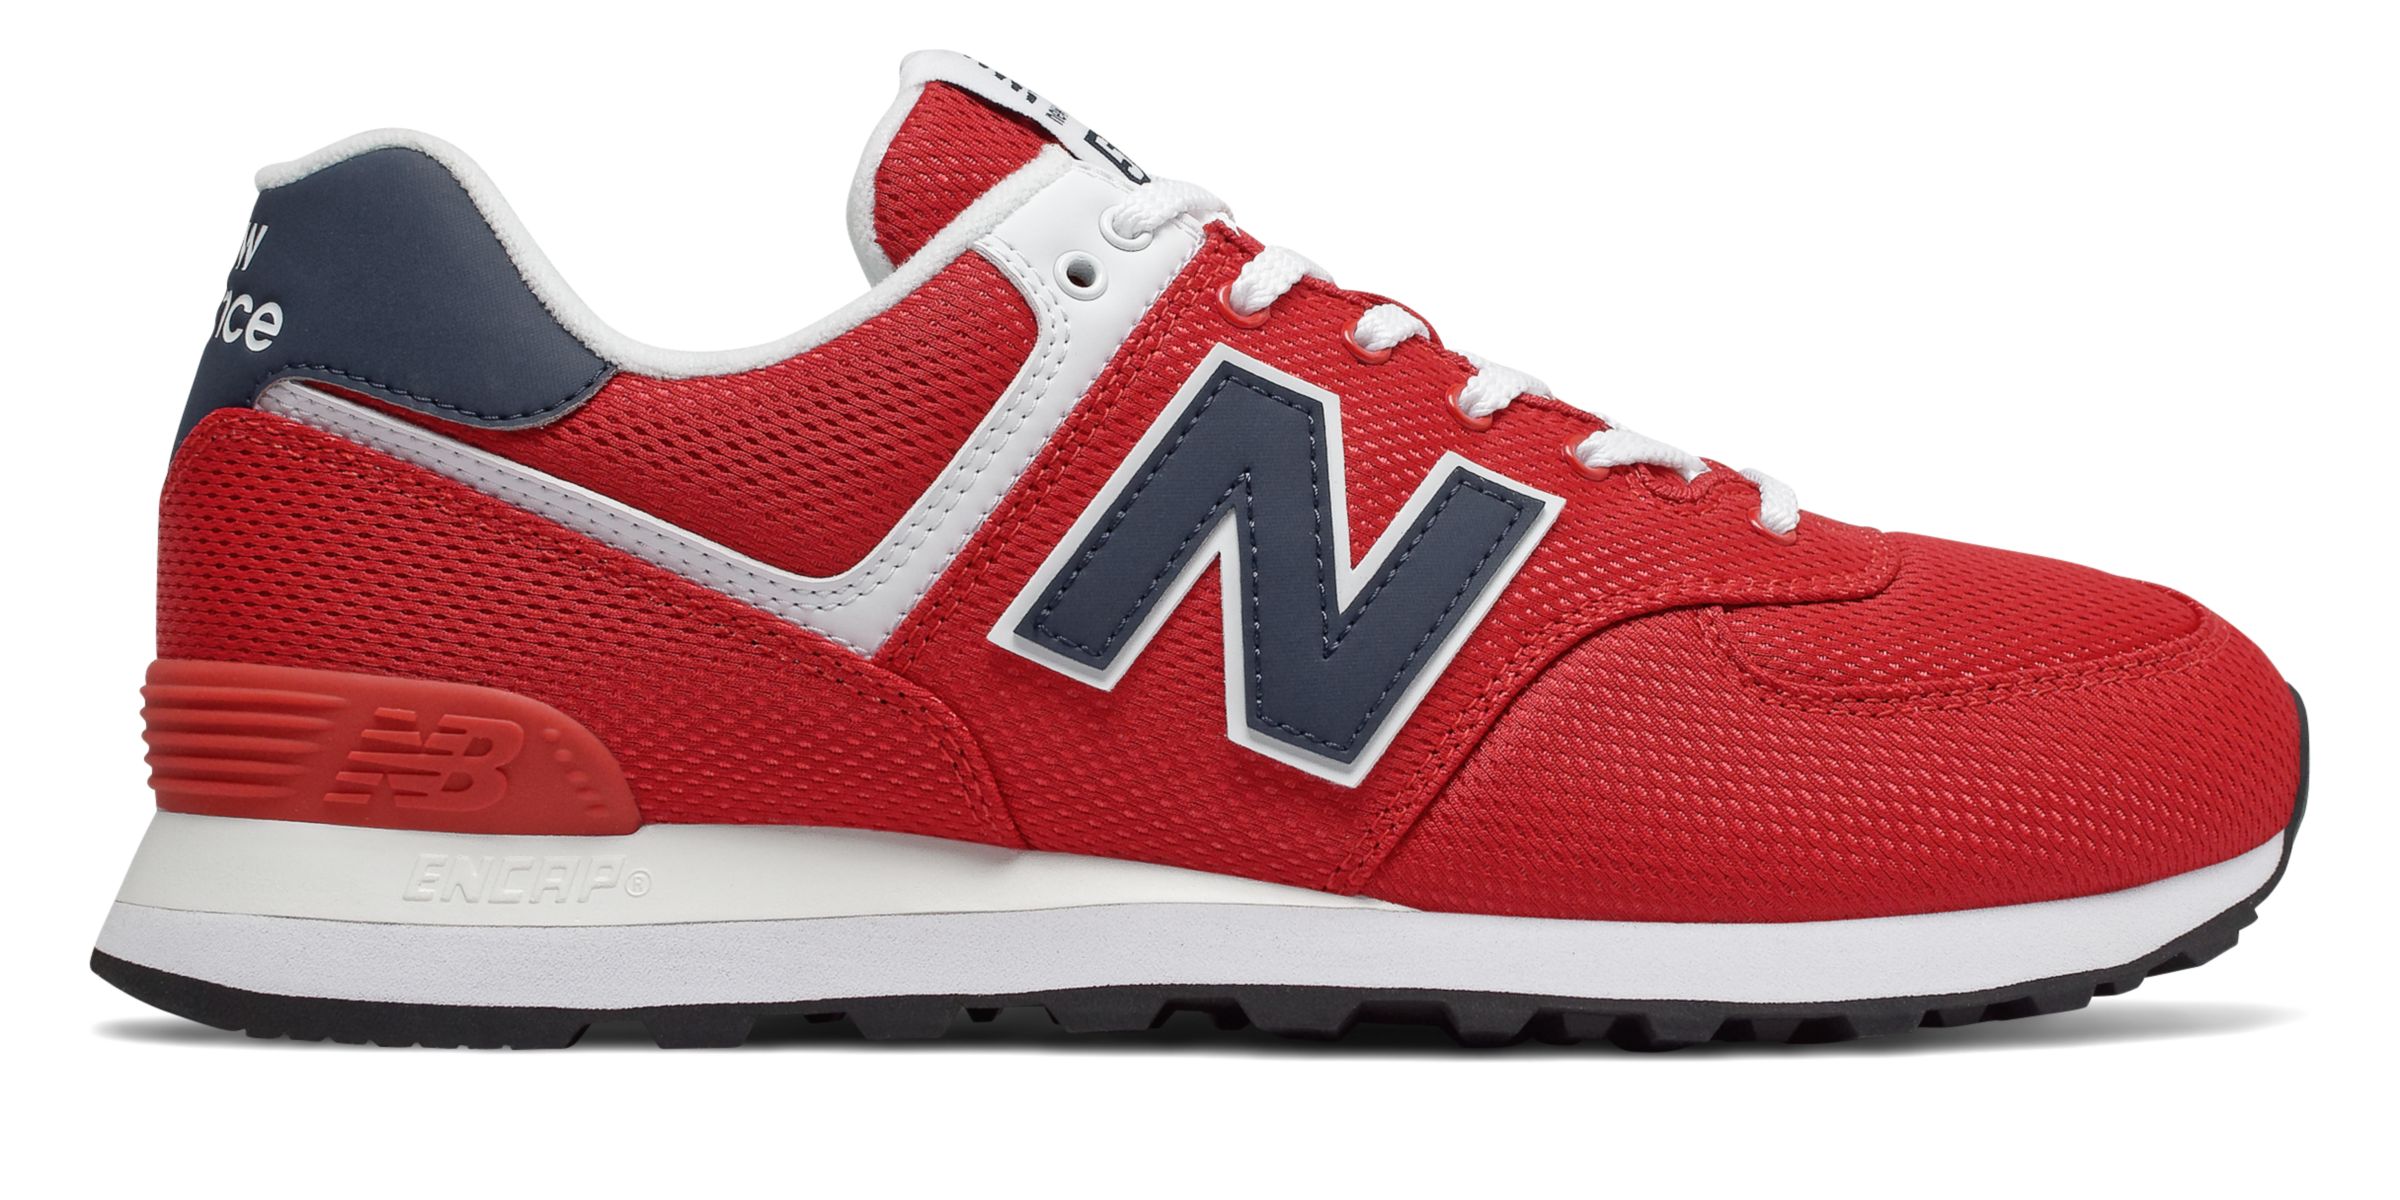 Men's 574 Collection - New Balance